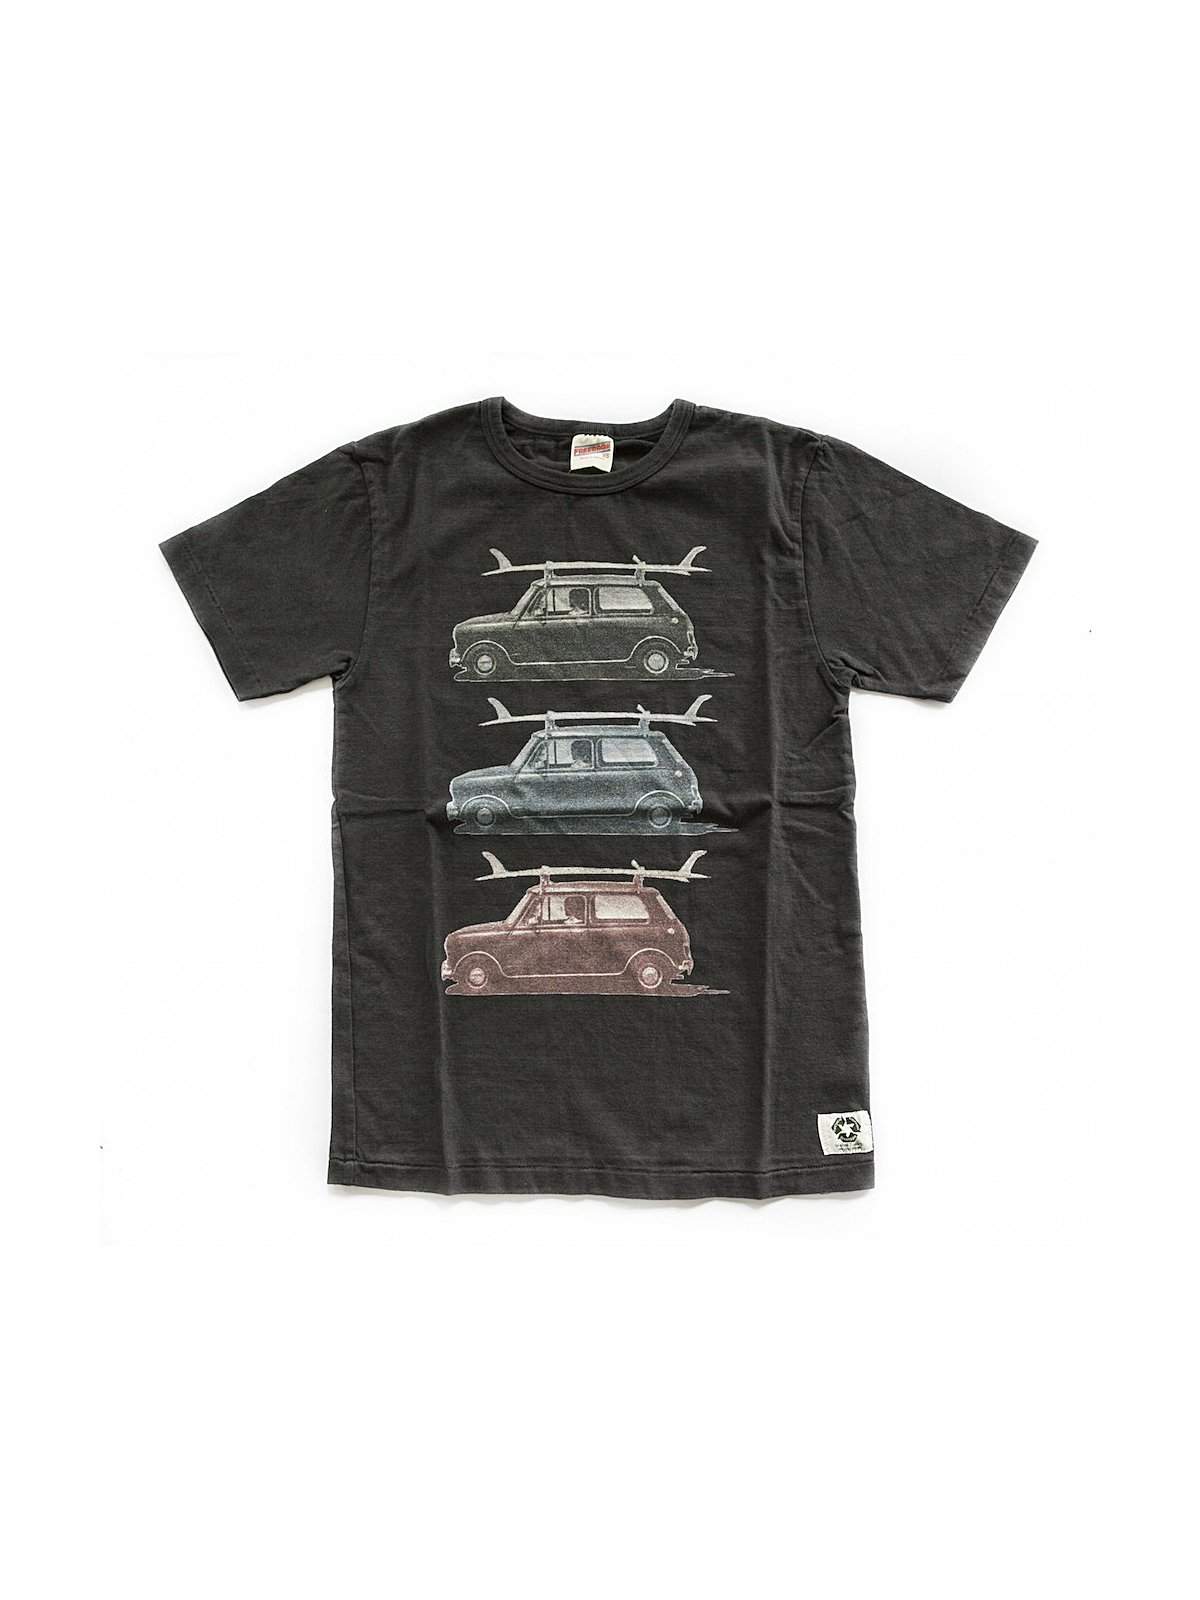 Free Rage Classic Car Tee Black - MORE by Morello Indonesia